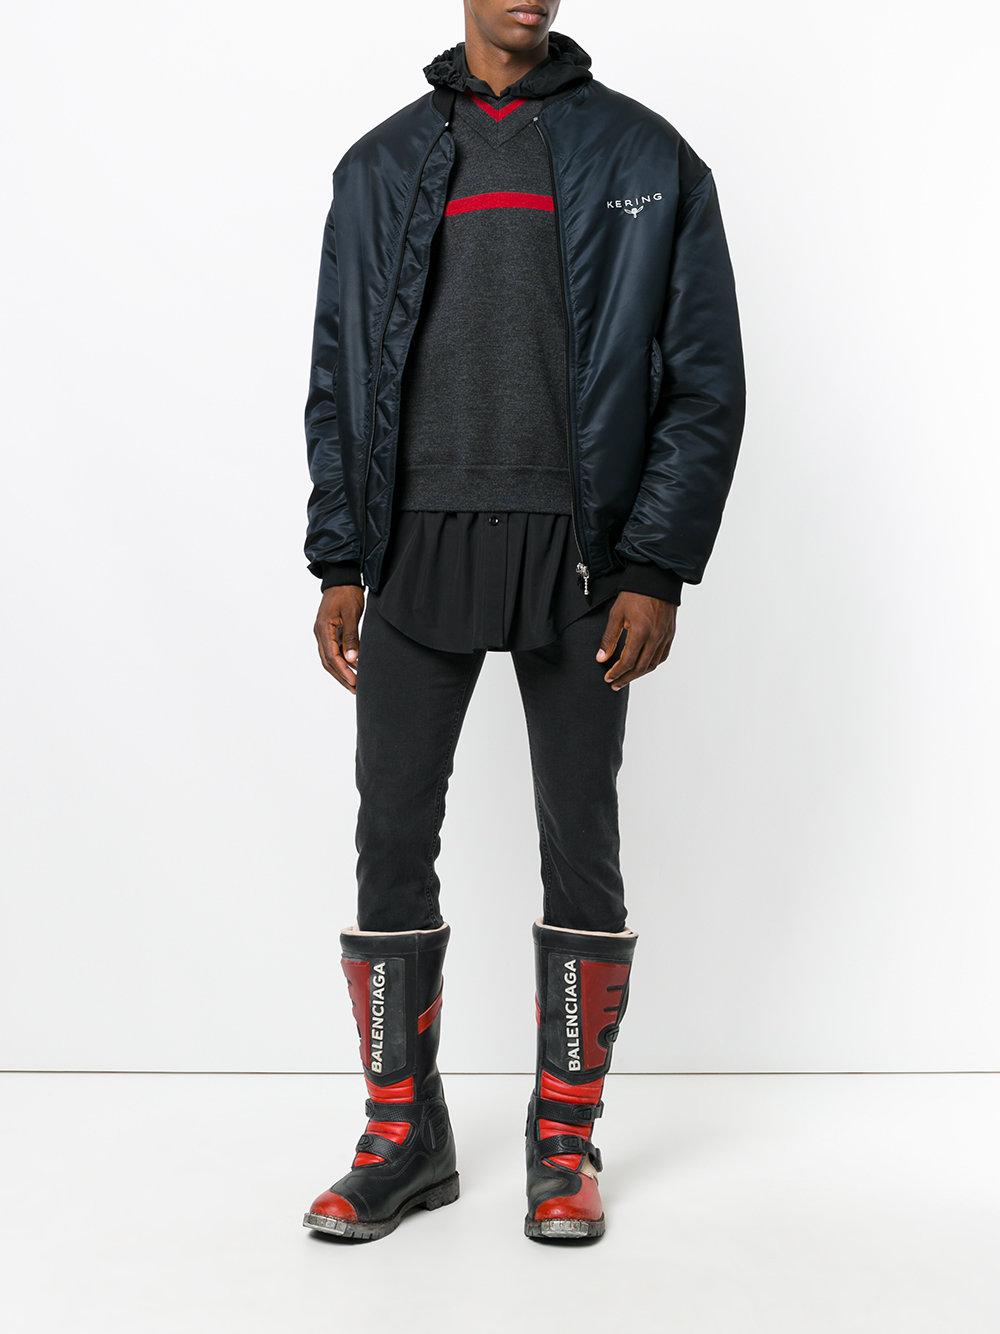 Balenciaga Rider Moto Boots in Red for Men | Lyst